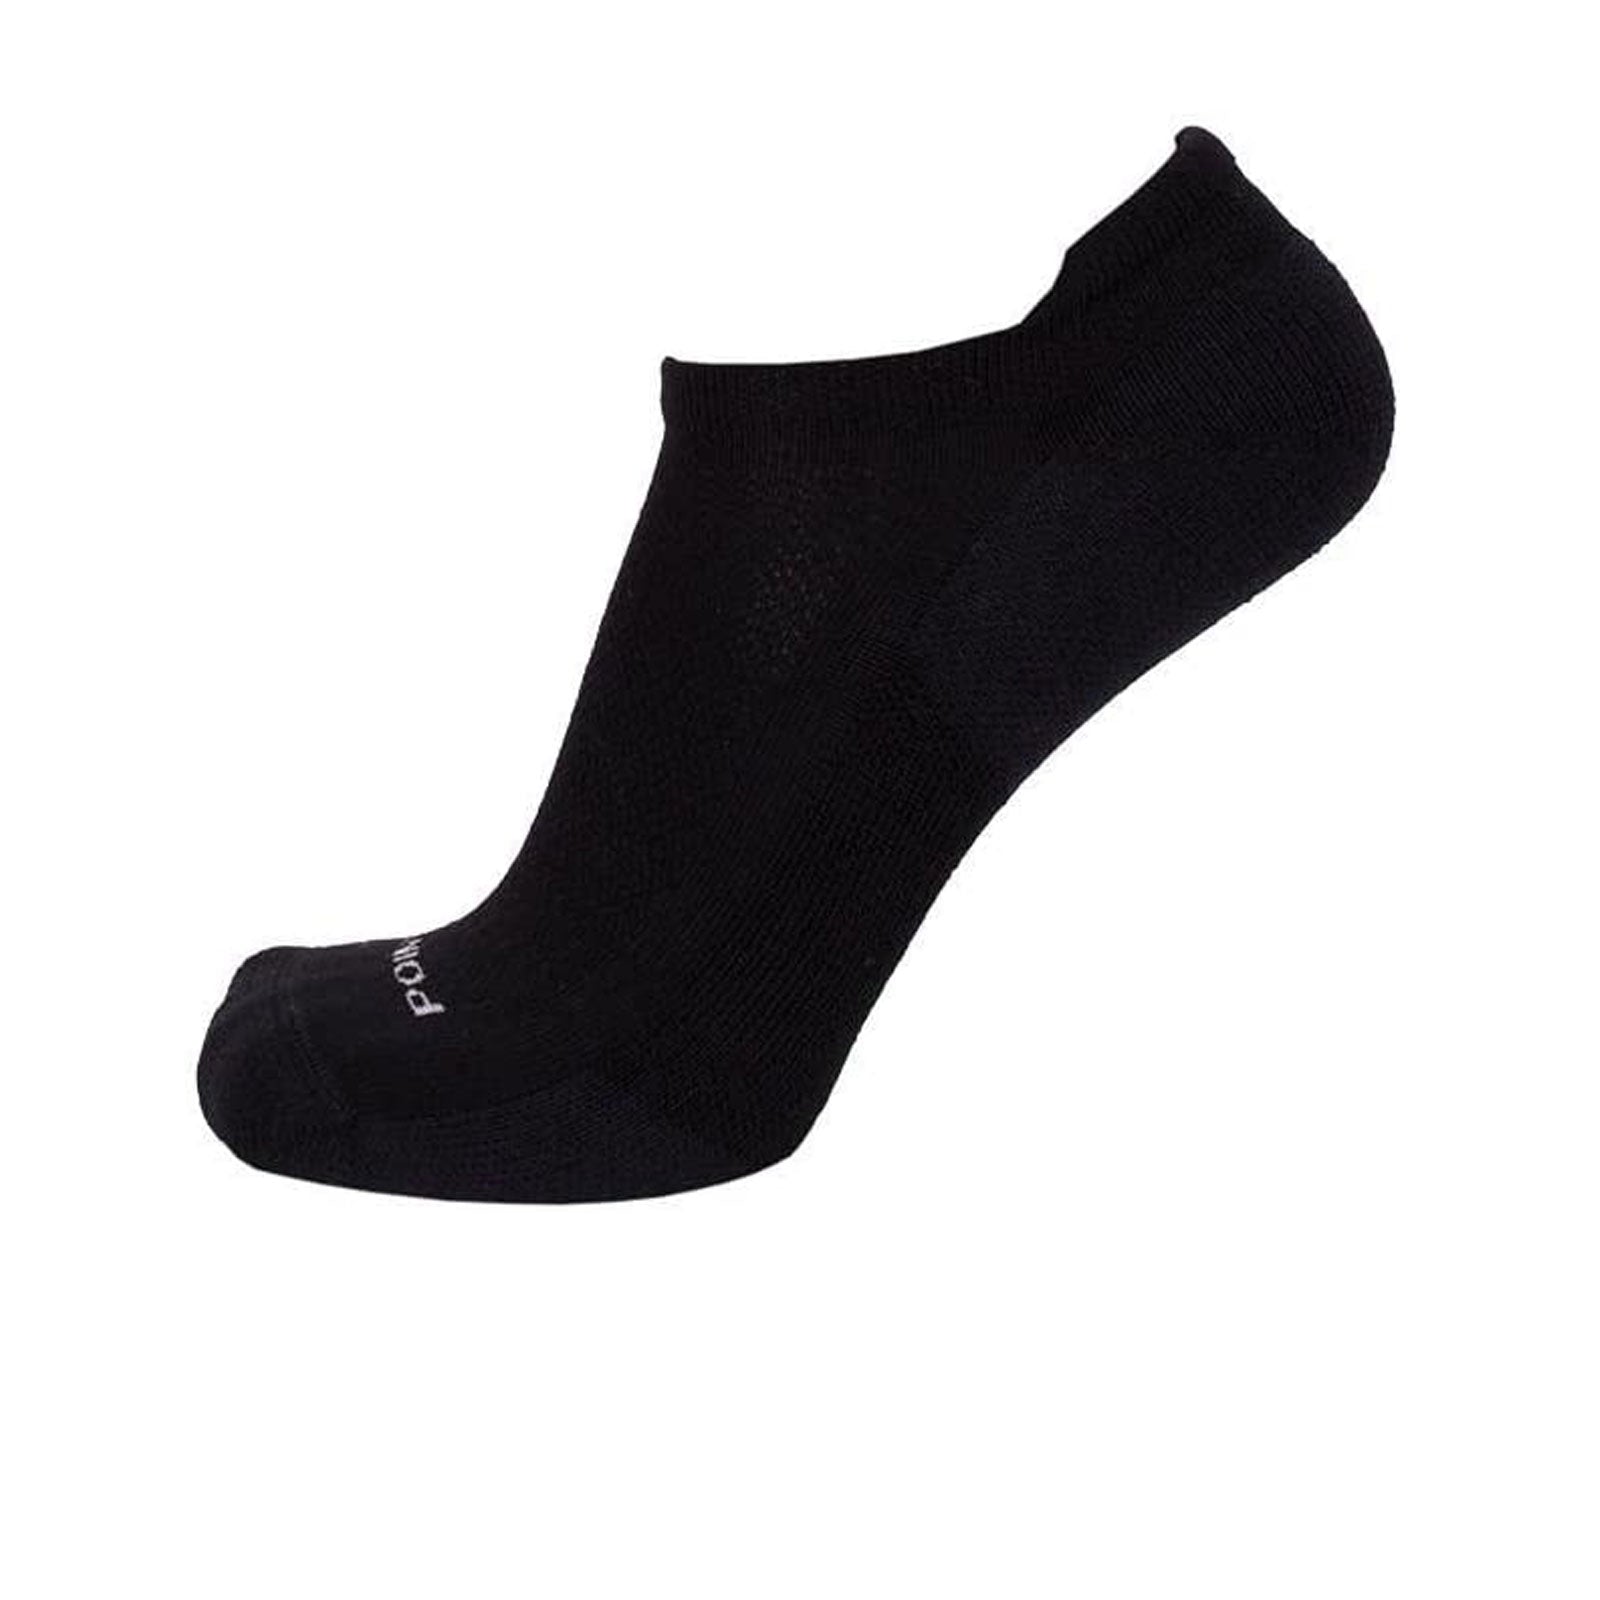 Point6 37.5 Extra Light Micro (Women) - Black Socks - Perf - Micro - The Heel Shoe Fitters